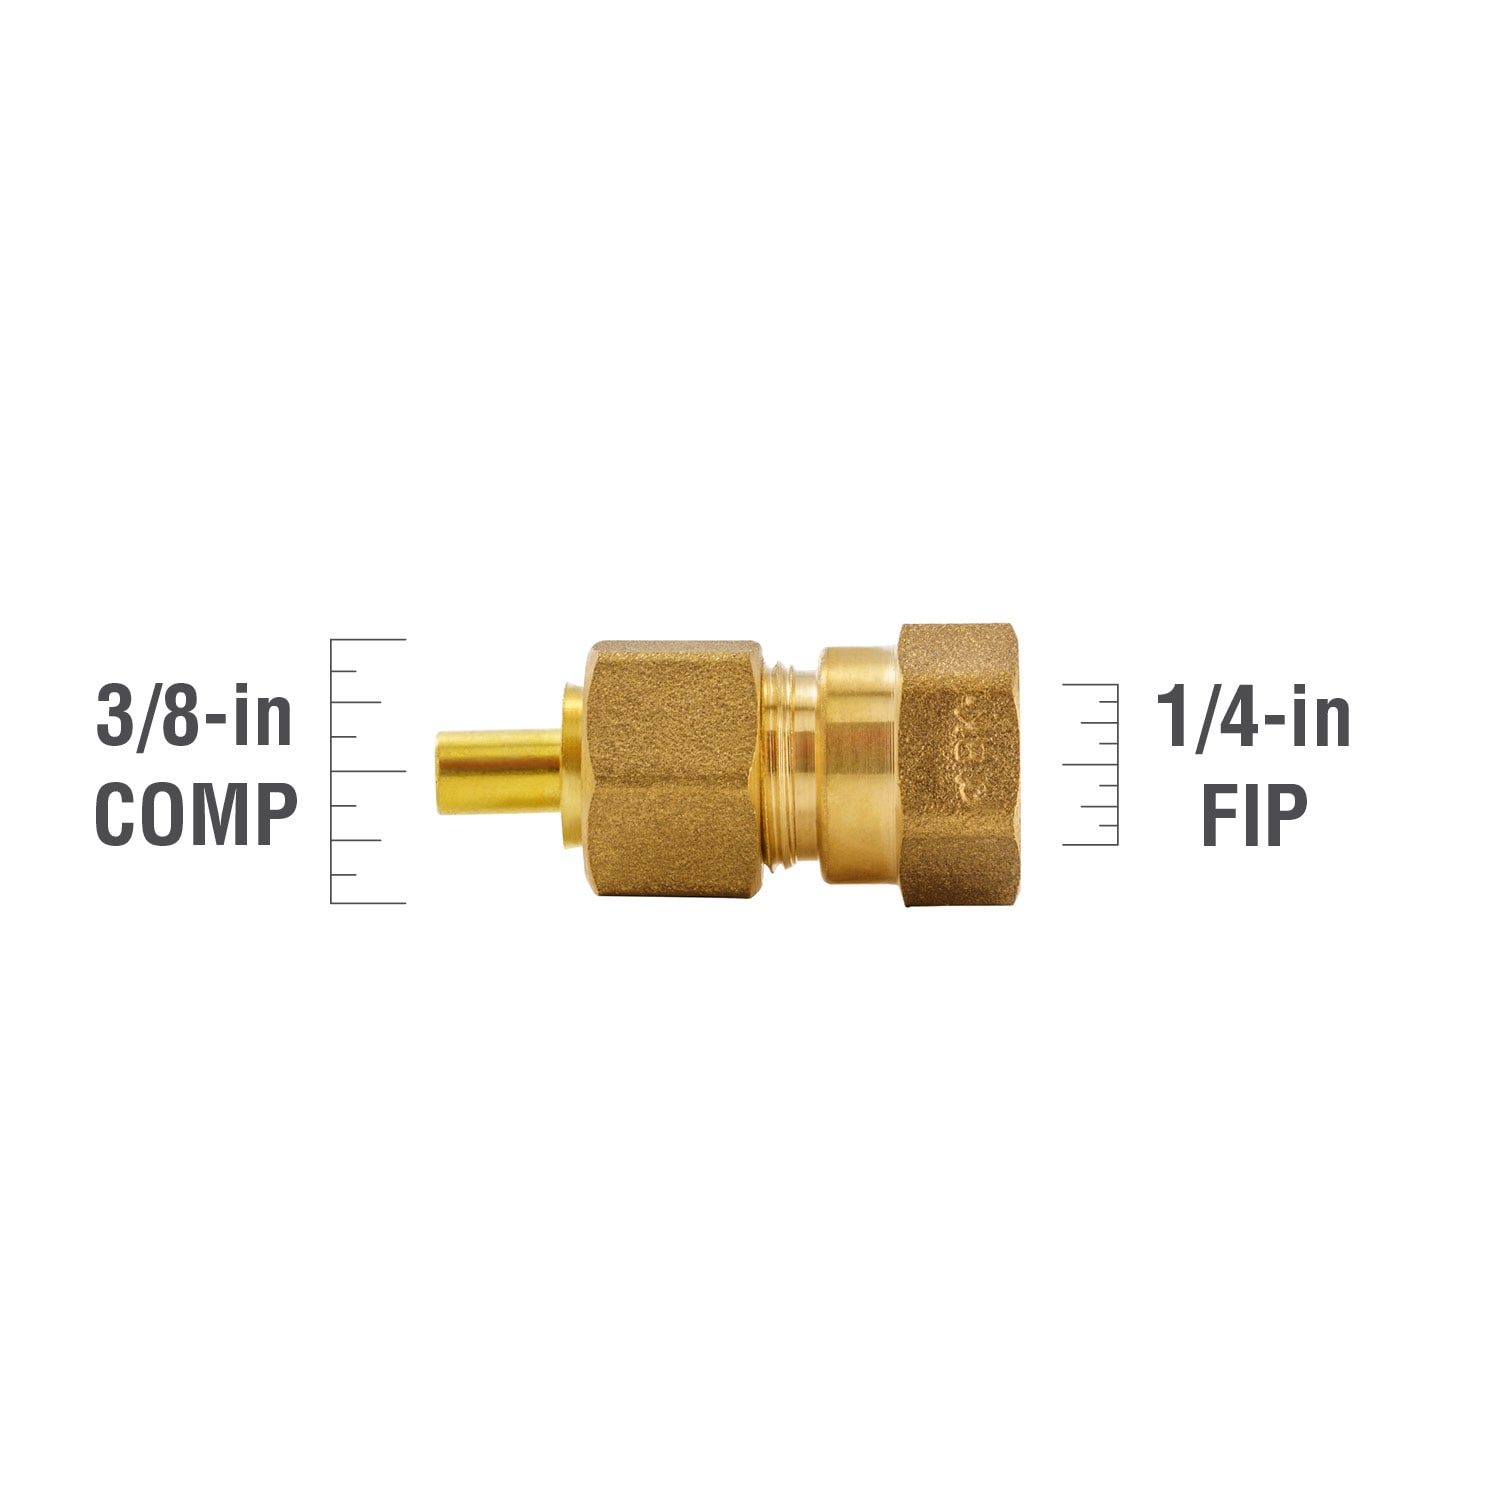 Proline Series 1/4-in x 3/8-in Compression Adapter Fitting in the